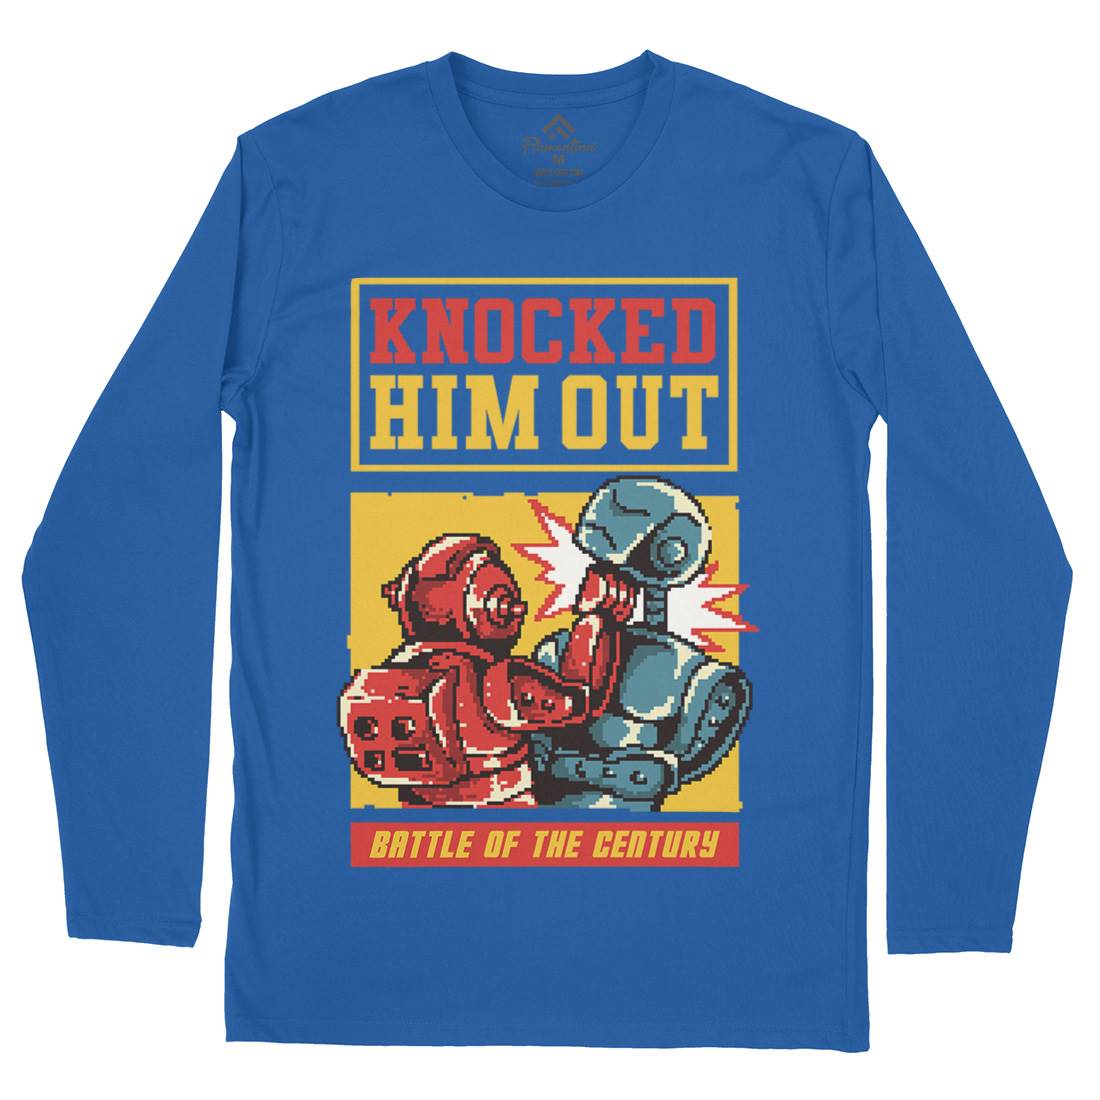 Knocked Him Out Mens Long Sleeve T-Shirt Space B923